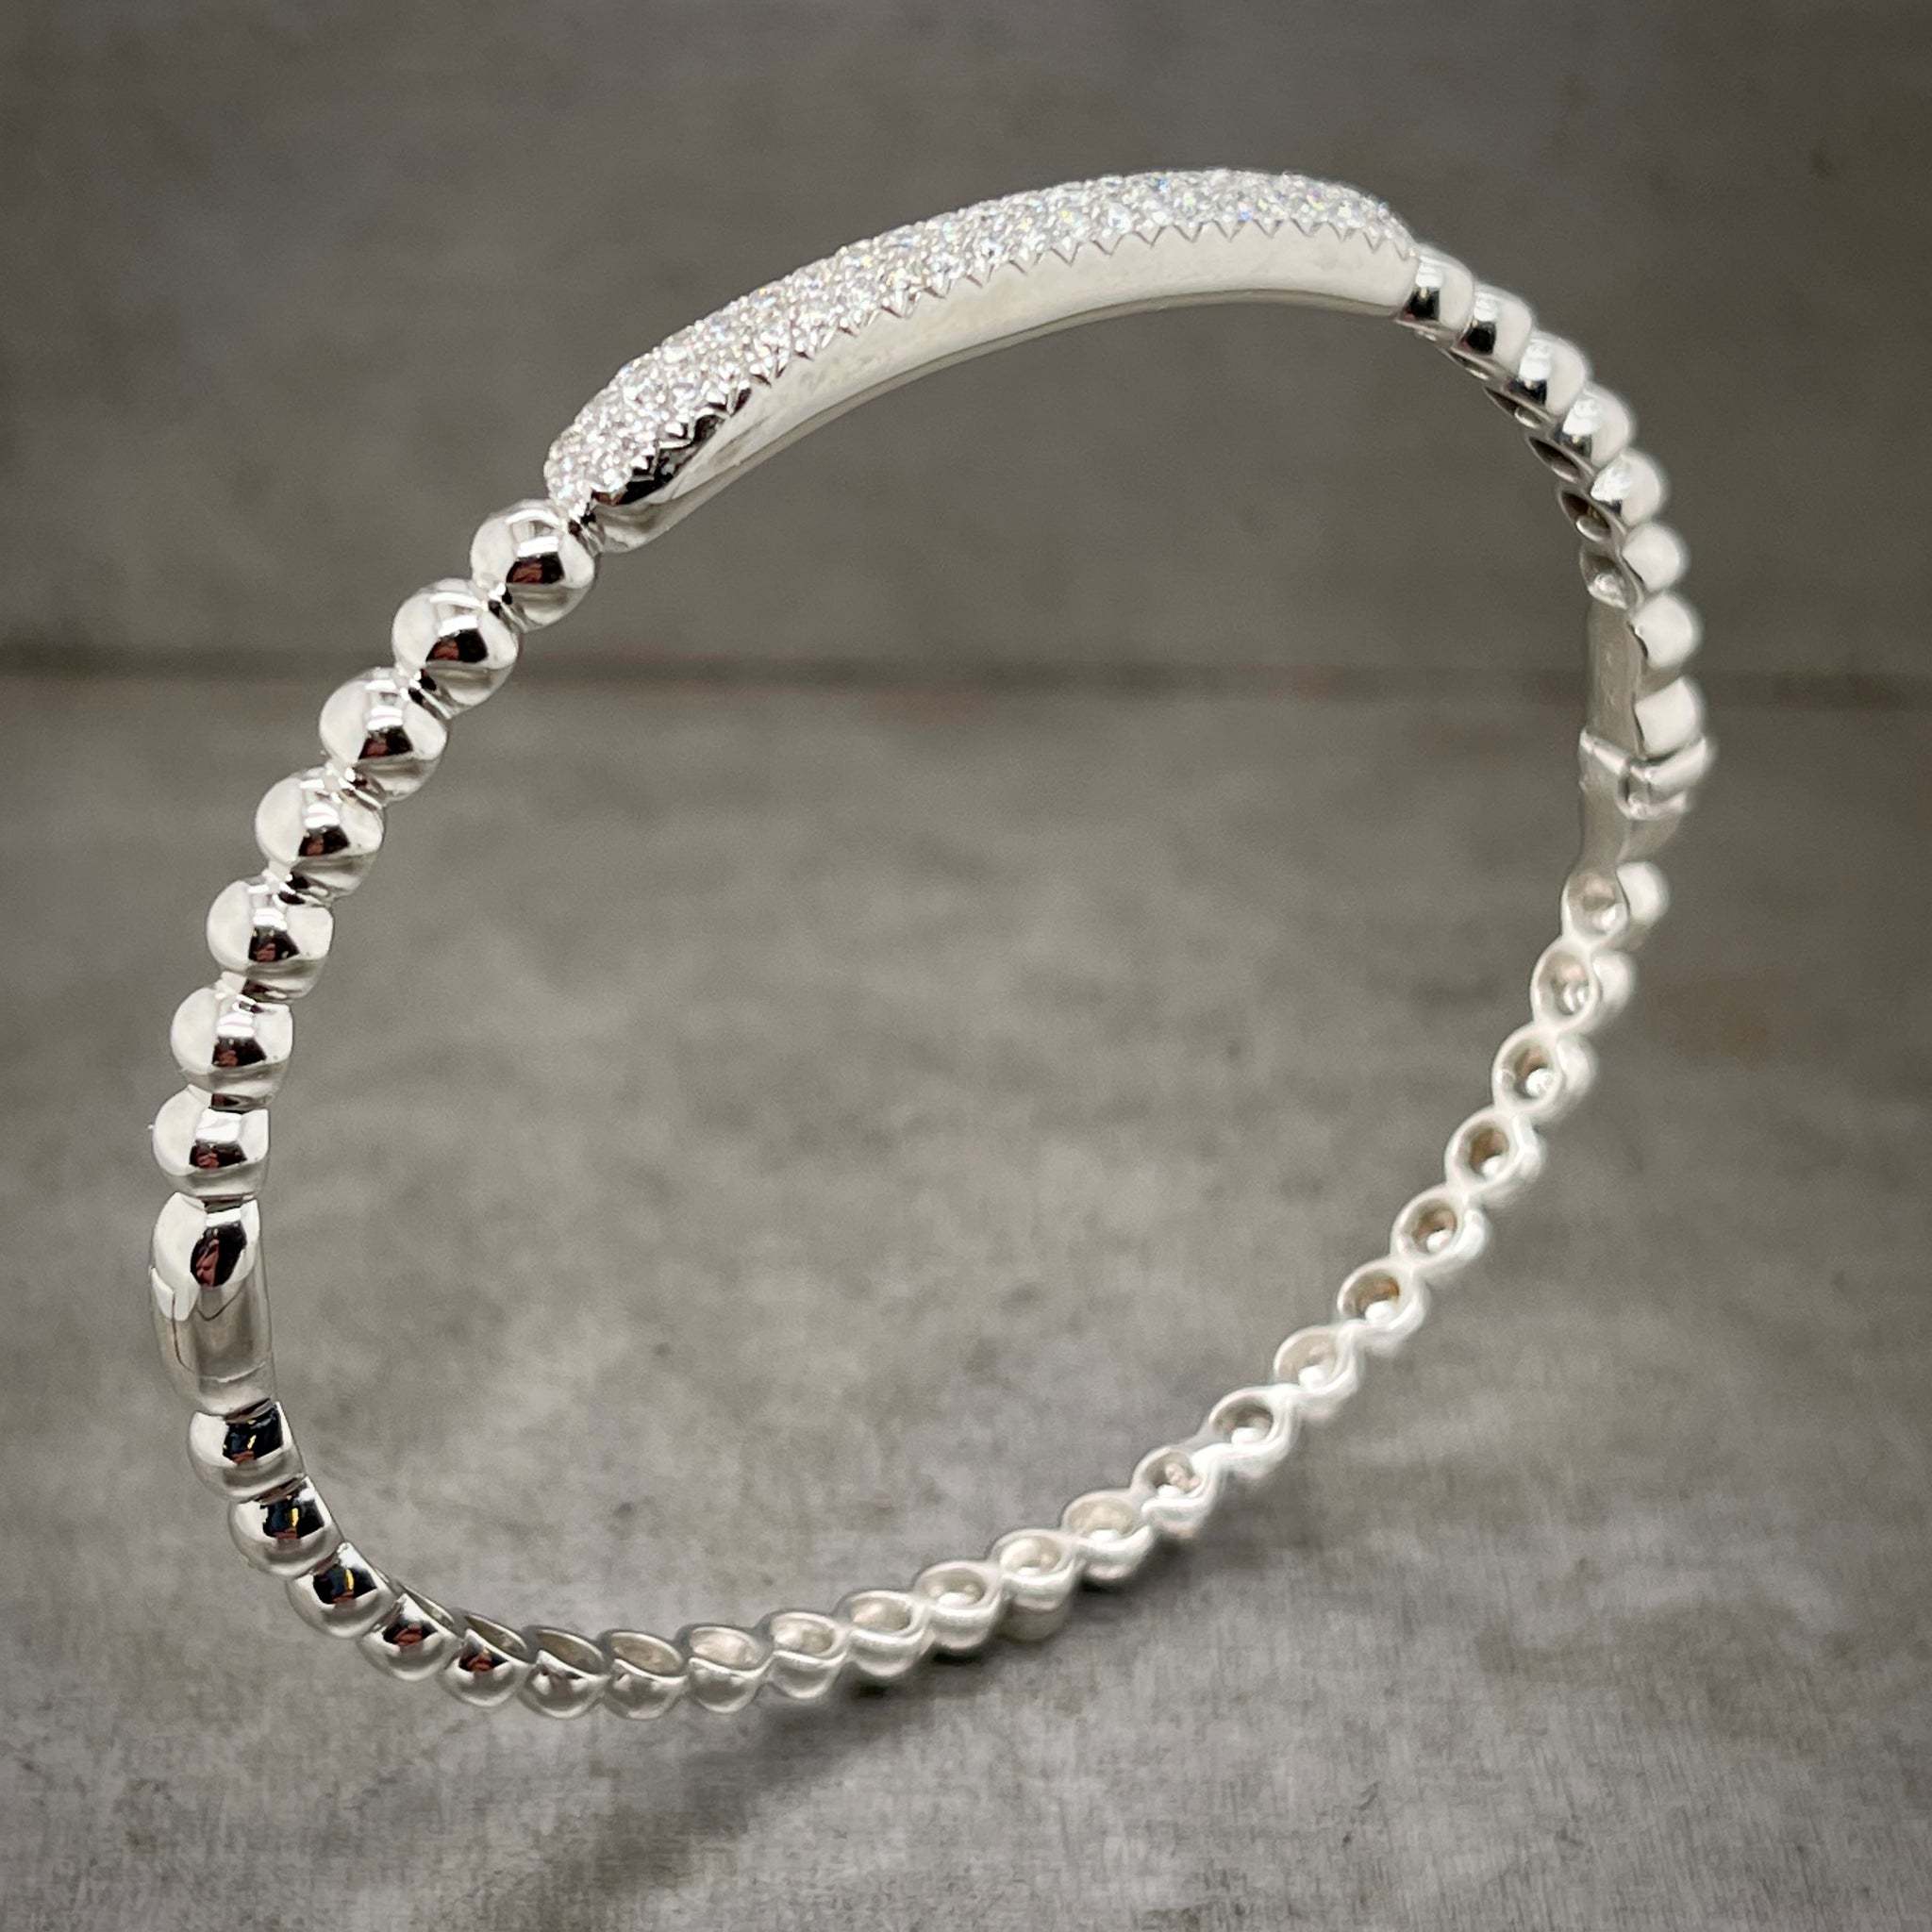 Full angled view of white gold diamond bangle standing up. Here you can see a bar that has multiple rows of pave set diamonds at the top of the bracelet, covering 1/5 of the circumference. The rest of the bangle is composed of balls of white gold. 